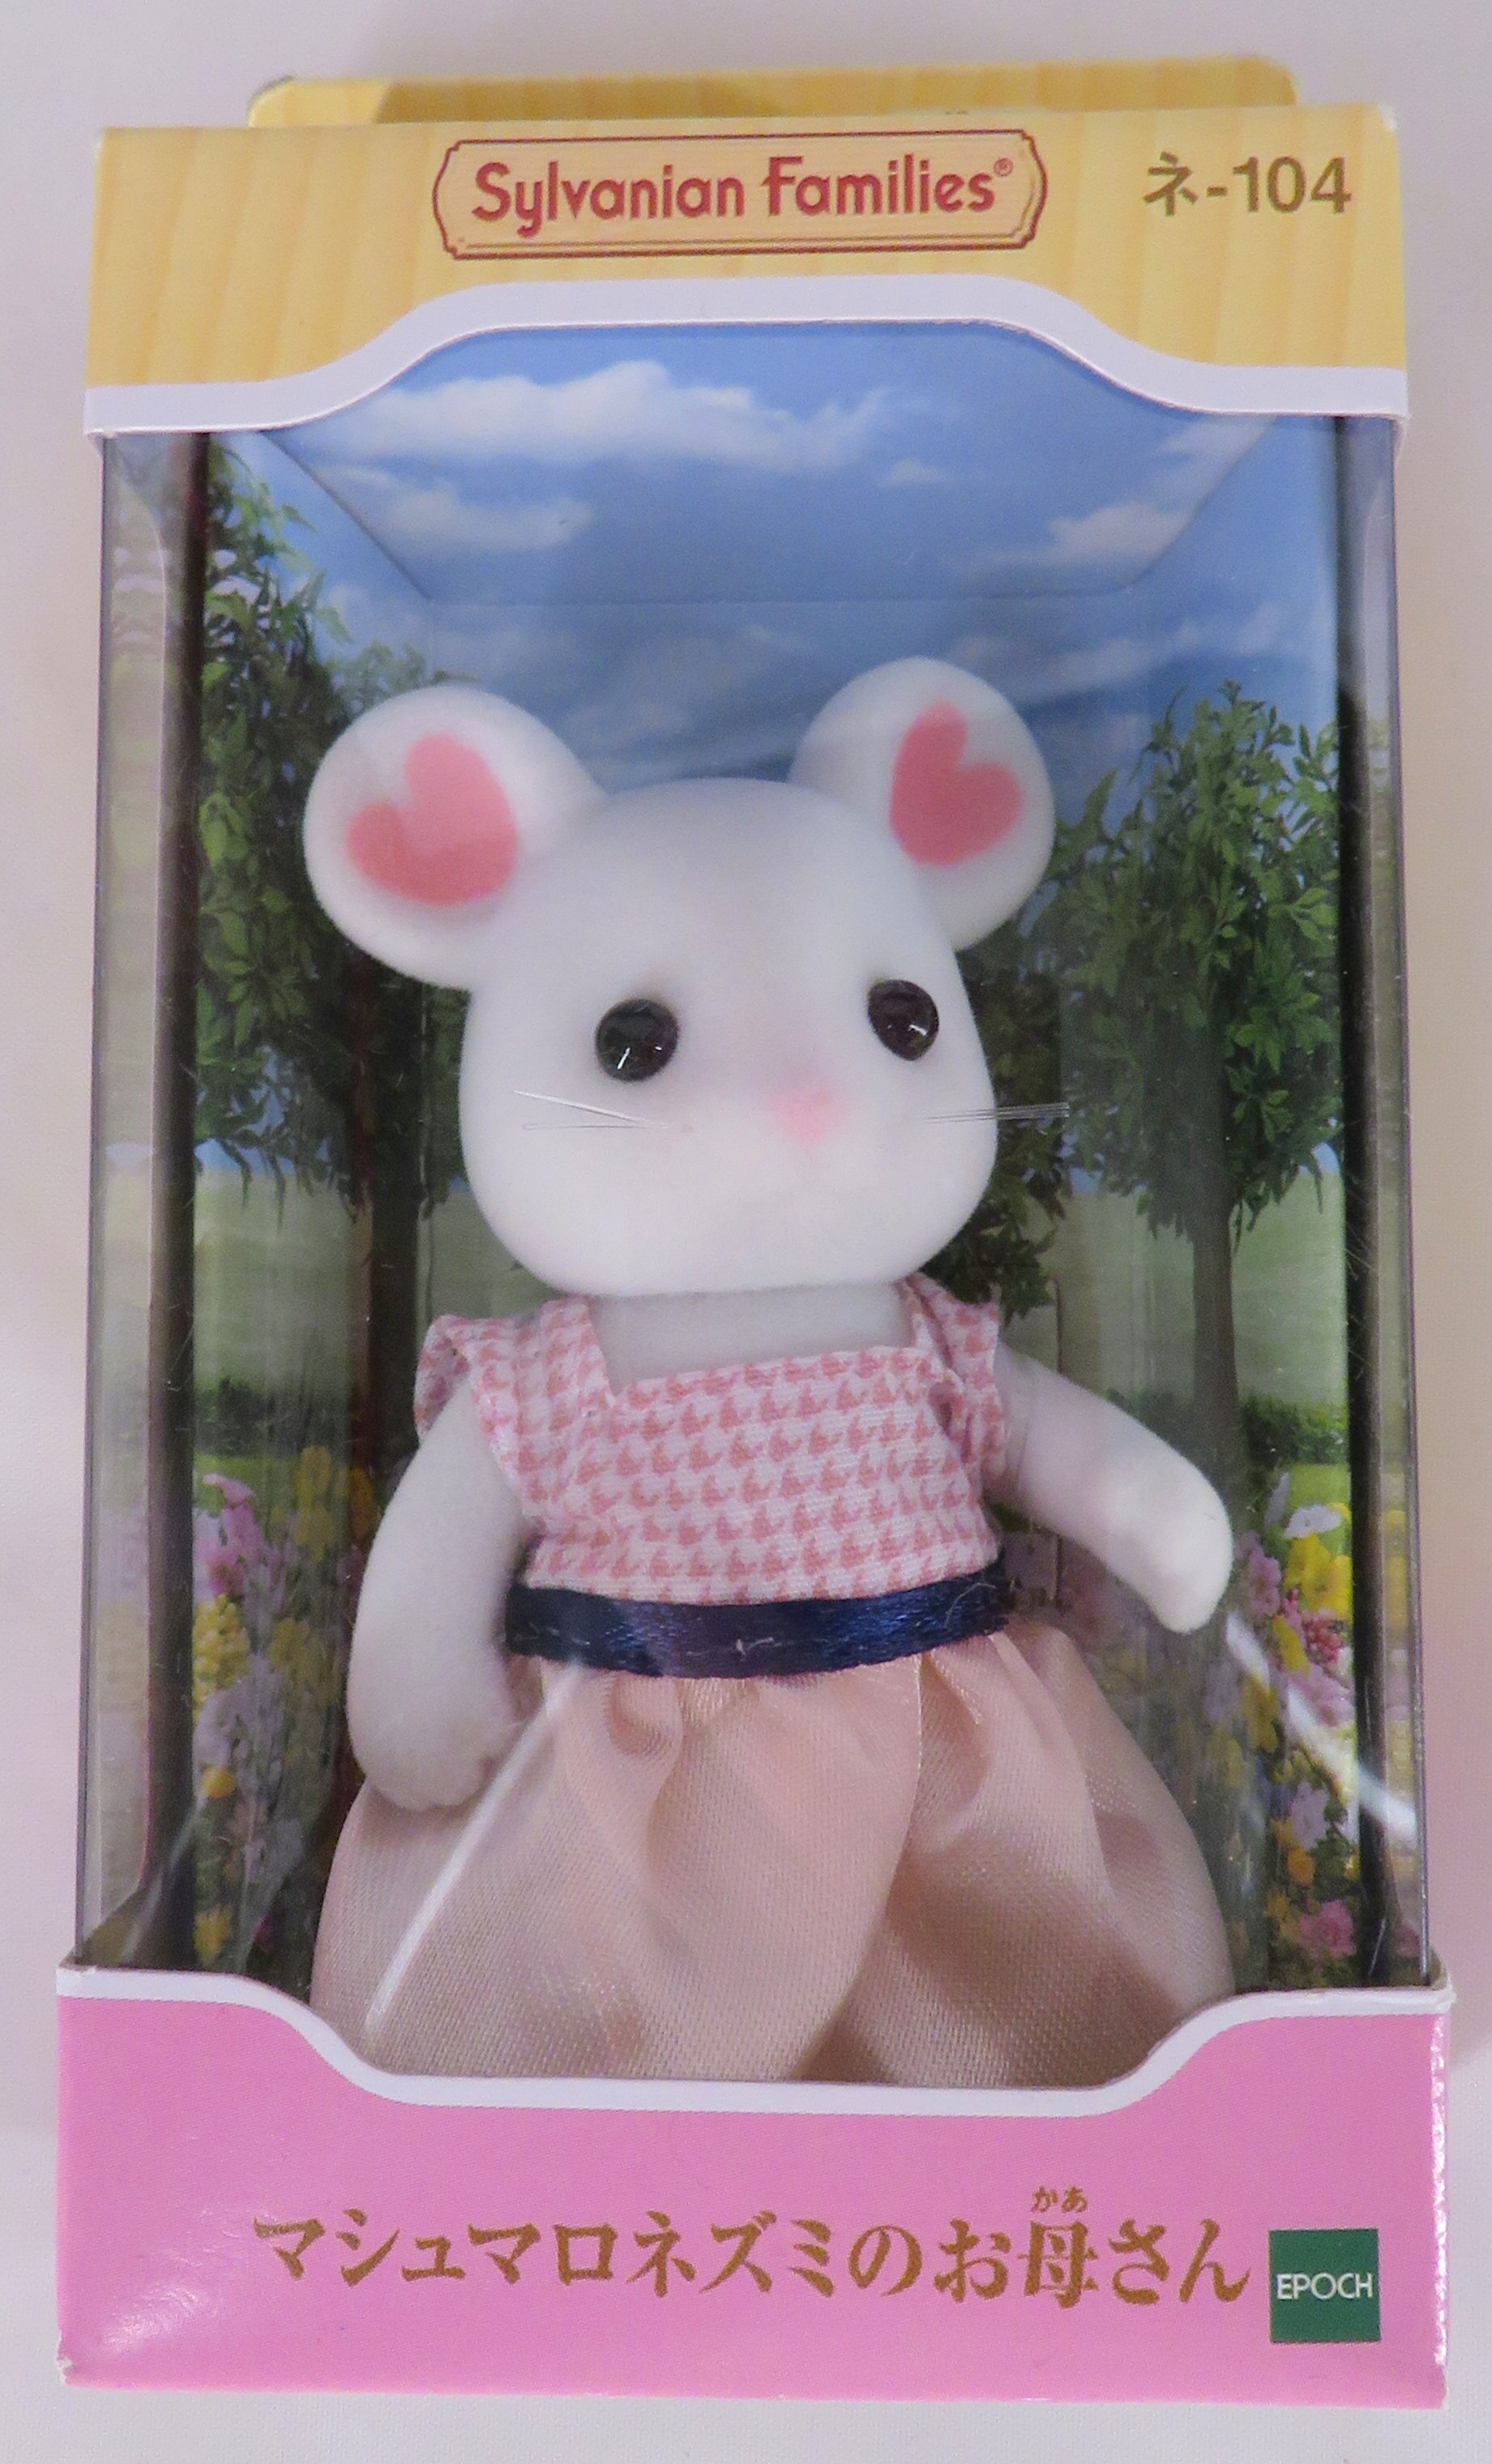 Sylvanian Families MARSHMALLOW MOUSE MOTHER NE-104 Epoch Japan Calico Critters 